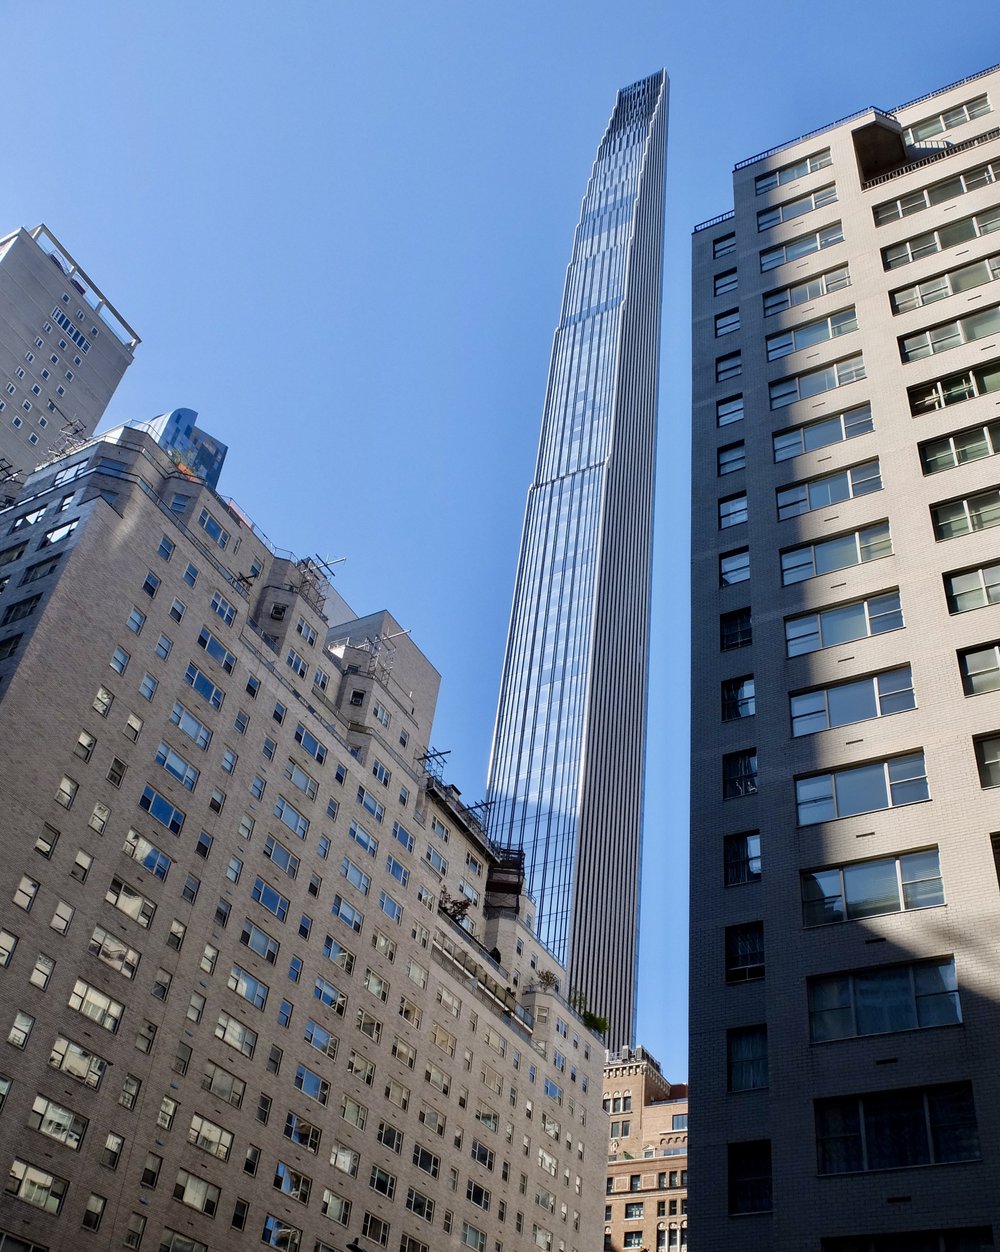  111 West 57th Street by SHoP Architects (2022) “is the skinniest skyscraper in the world with a staggering ratio of 24:1…” 